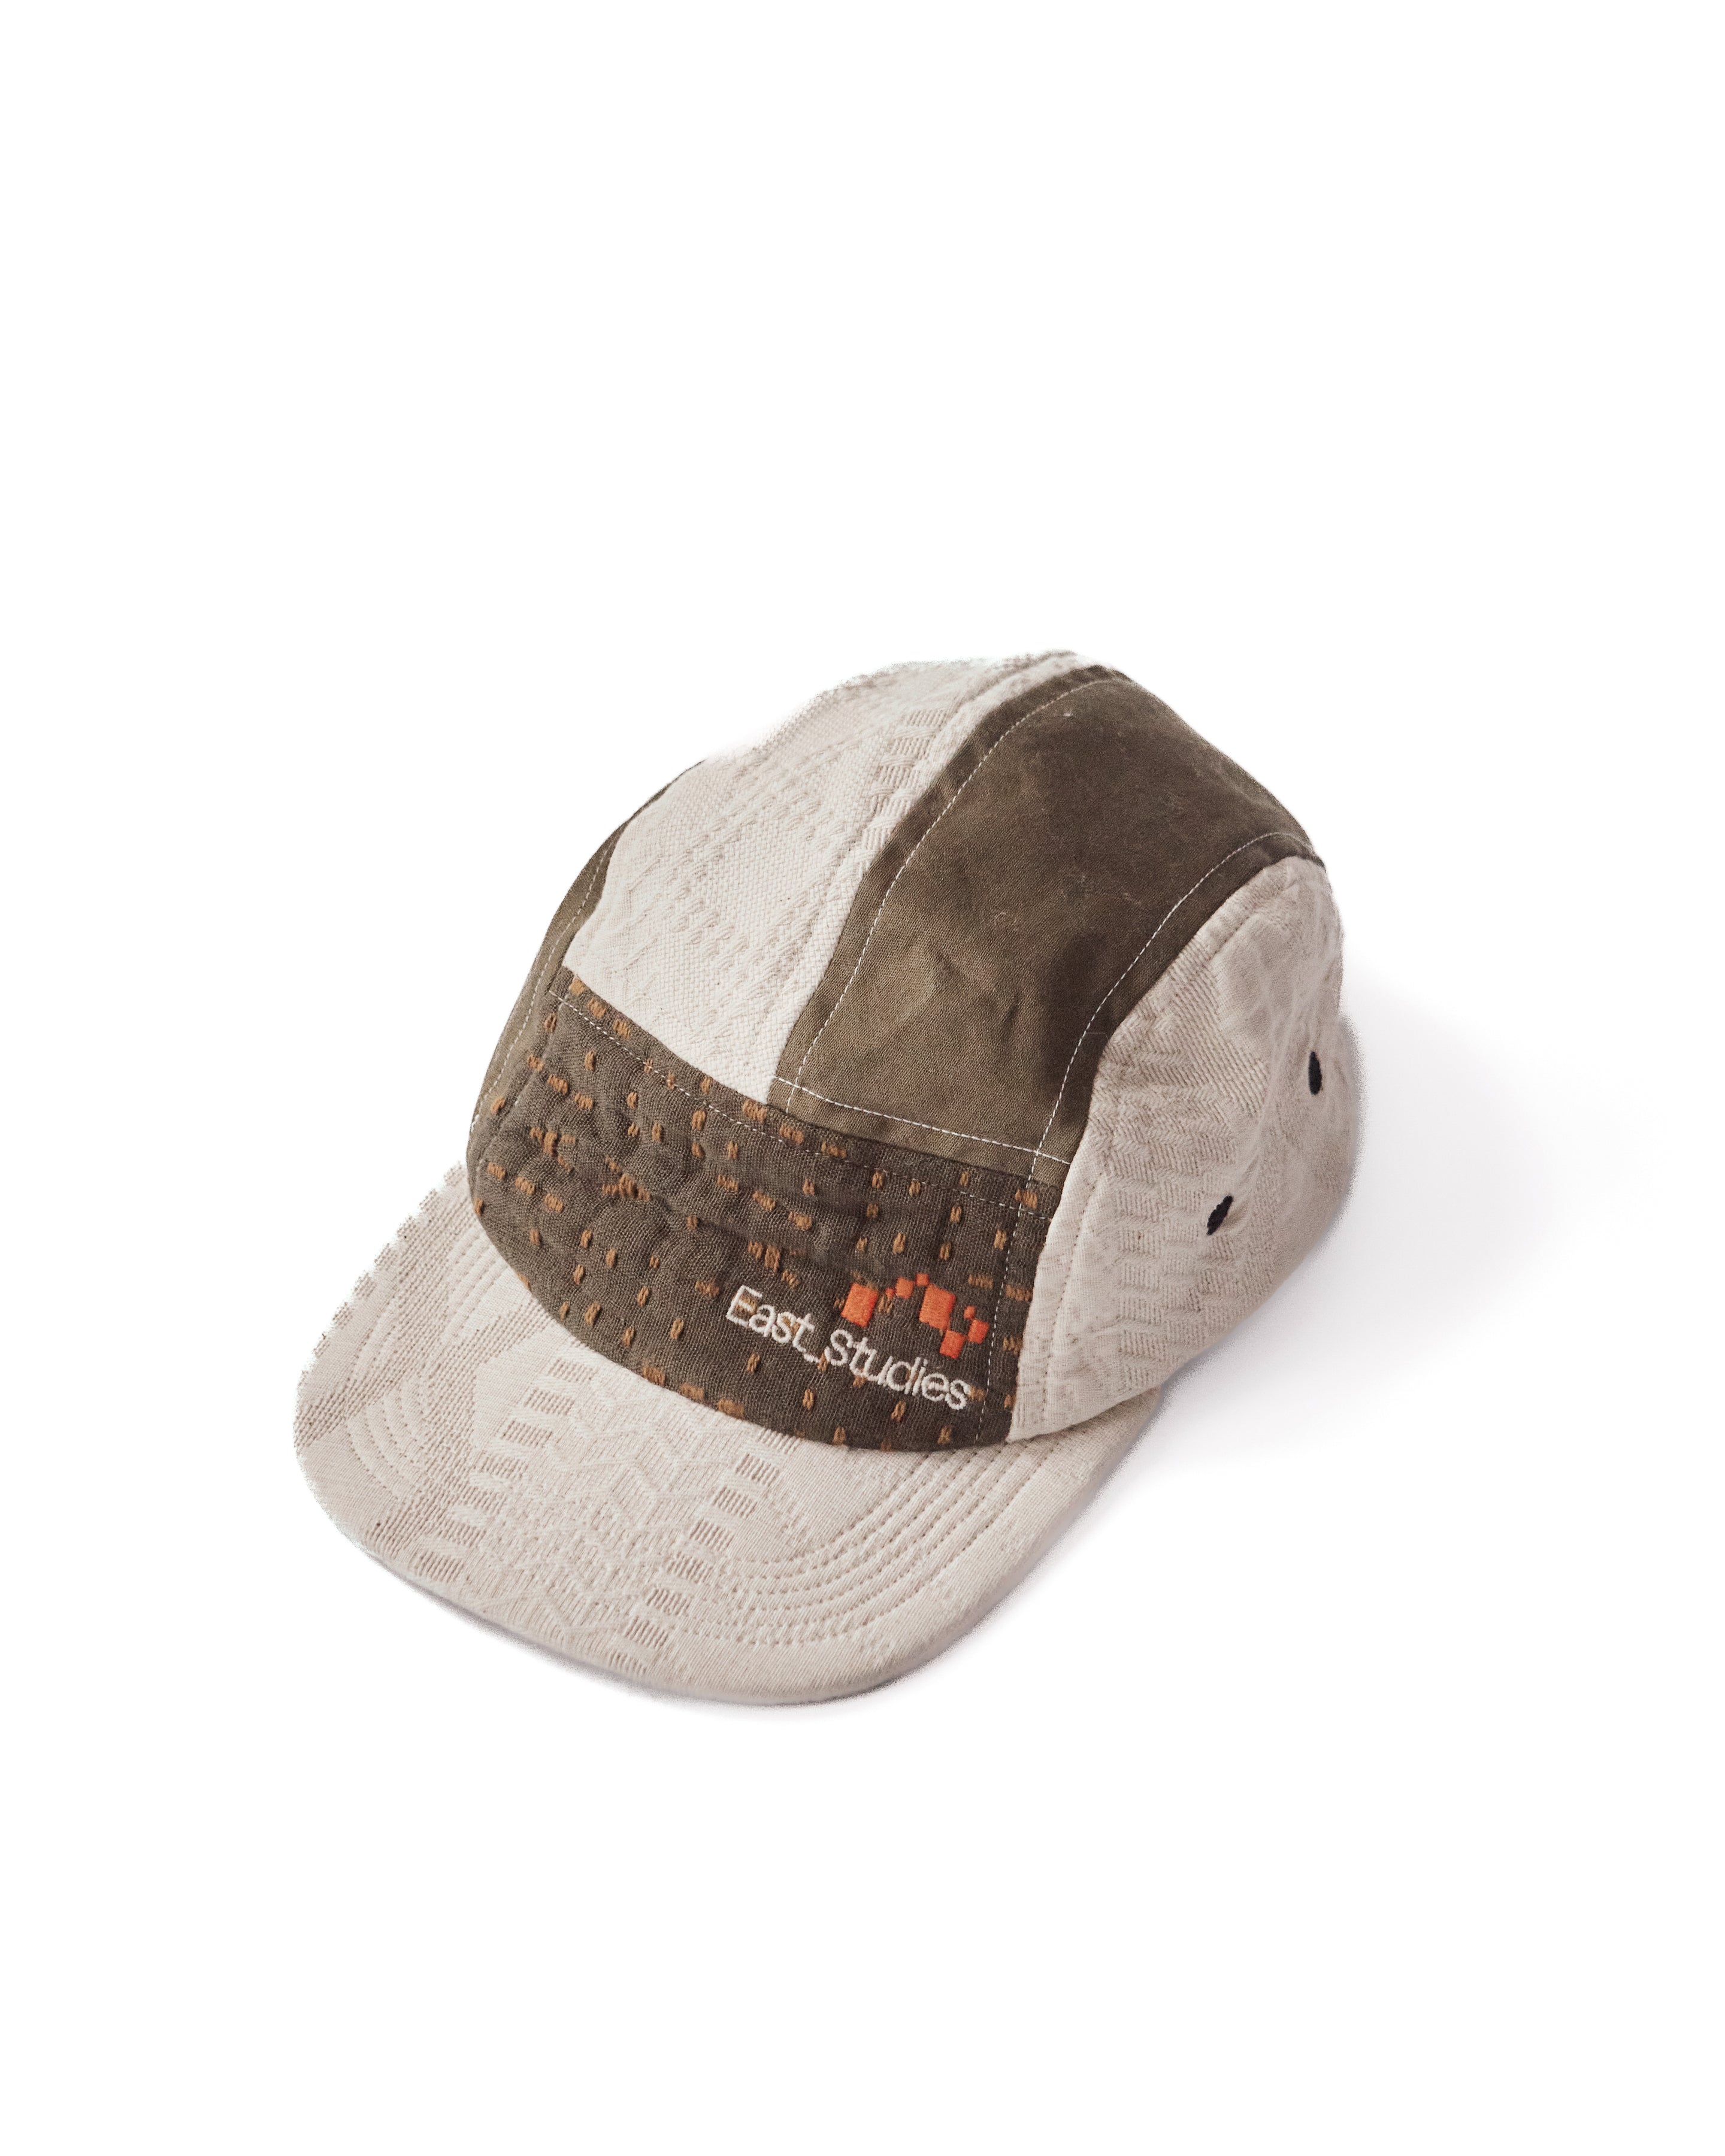 EAST_STUDIES CINCH BACK CAMP HAT  - UNDYED HANDWOVEN JACQUARD / WILLOW GREEN HAND QUILTED COTTON / SATEEN